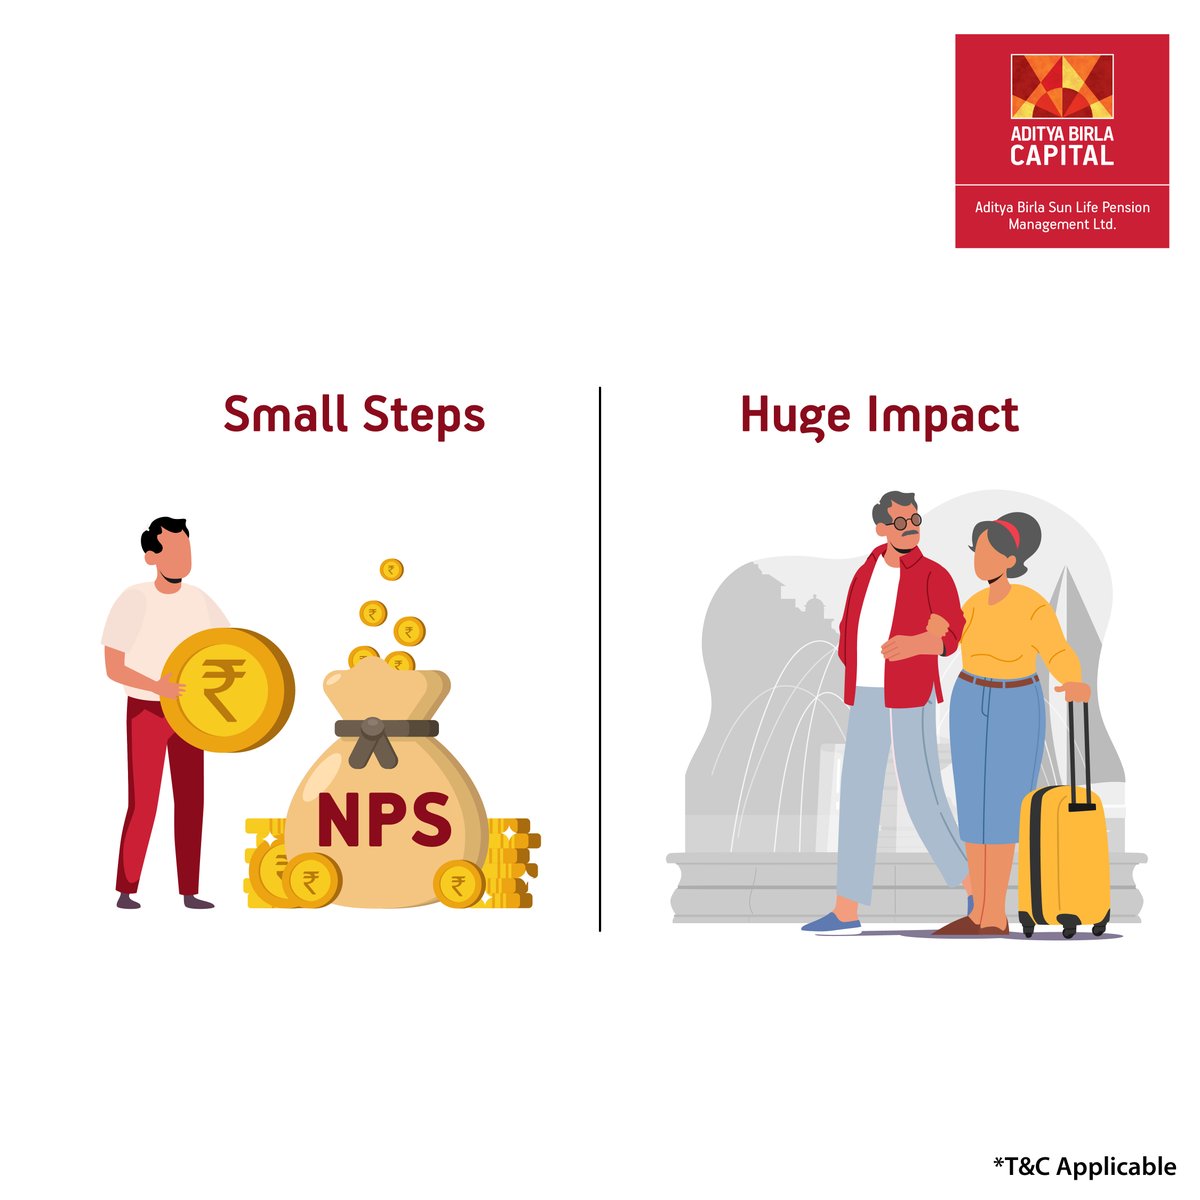 These small savings in NPS today will definitely have a big impact on your lifestyle post-retirement.

@PFRDAOfficial

#smallrolehugeimpact #smallrolebigimpact #hoppingonthetrend

#AdityaBirlaCapital #AdityaBirlaGroup #pensionfund #savings #retirementsavings #NPS #NPSZaruriHai